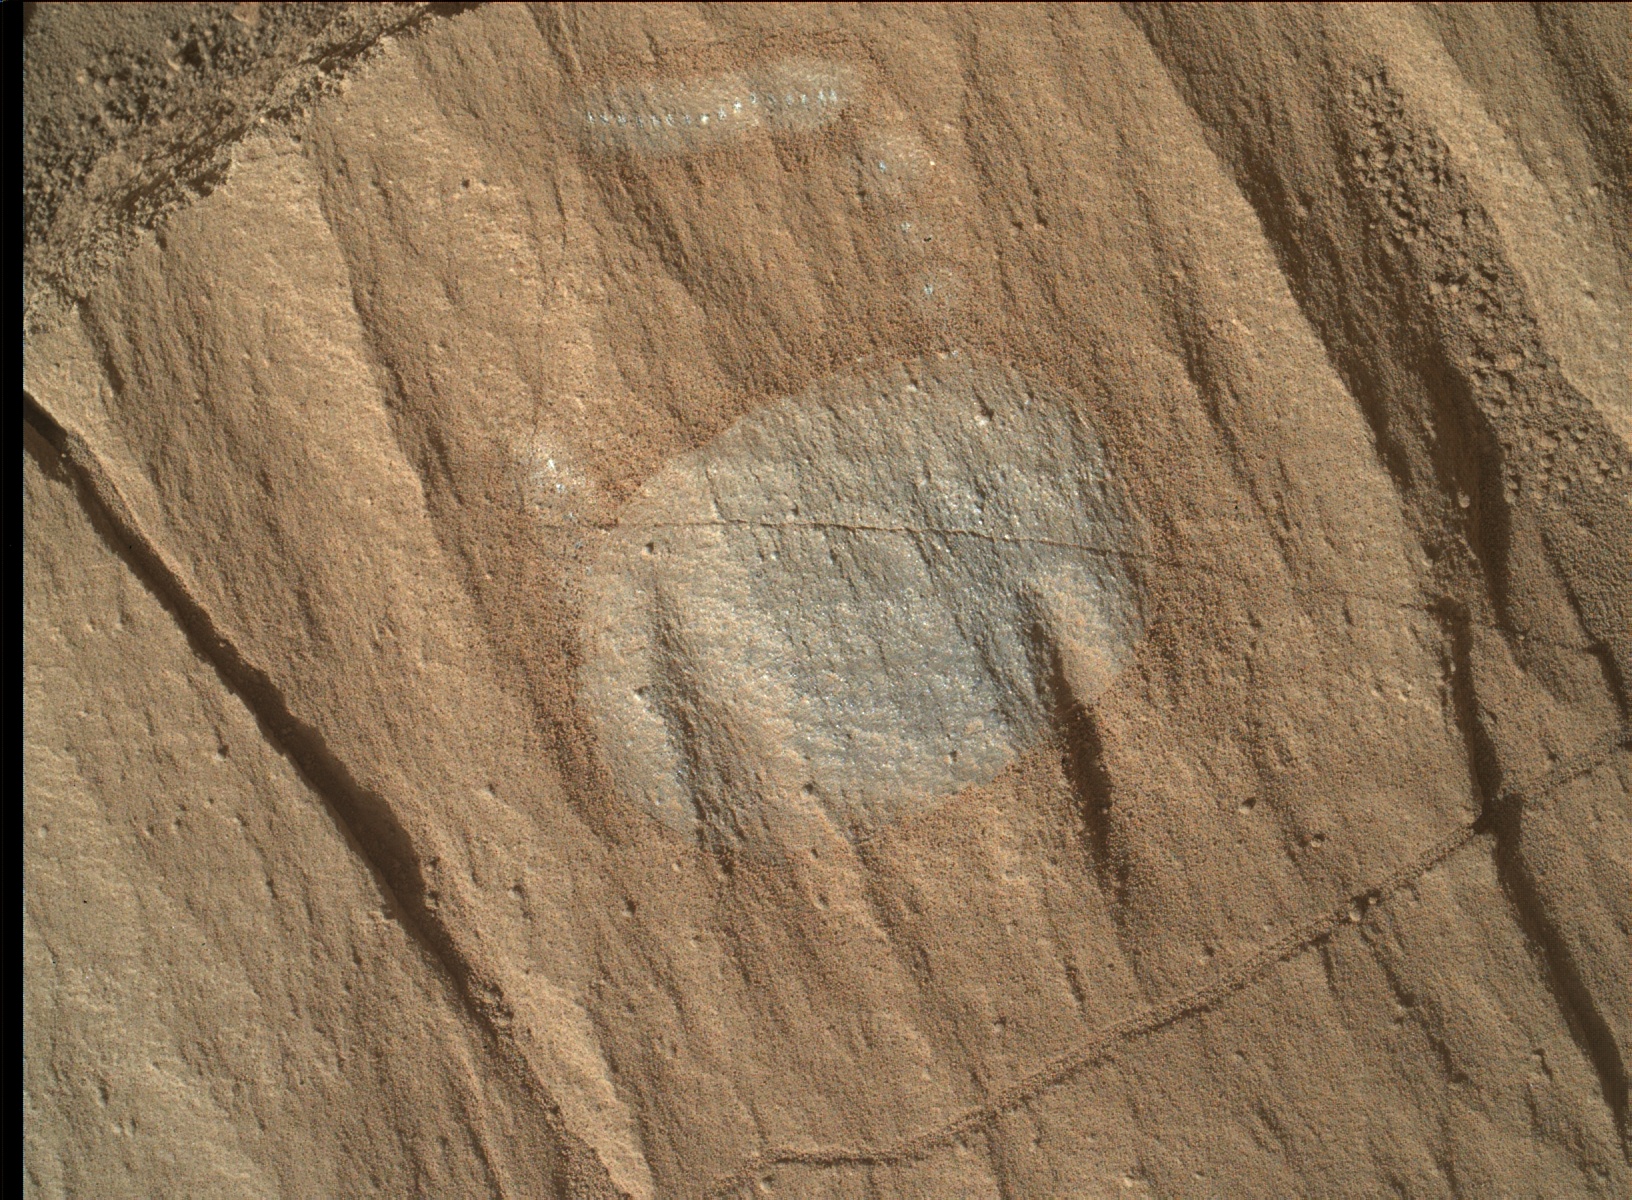 Nasa's Mars rover Curiosity acquired this image using its Mars Hand Lens Imager (MAHLI) on Sol 1318